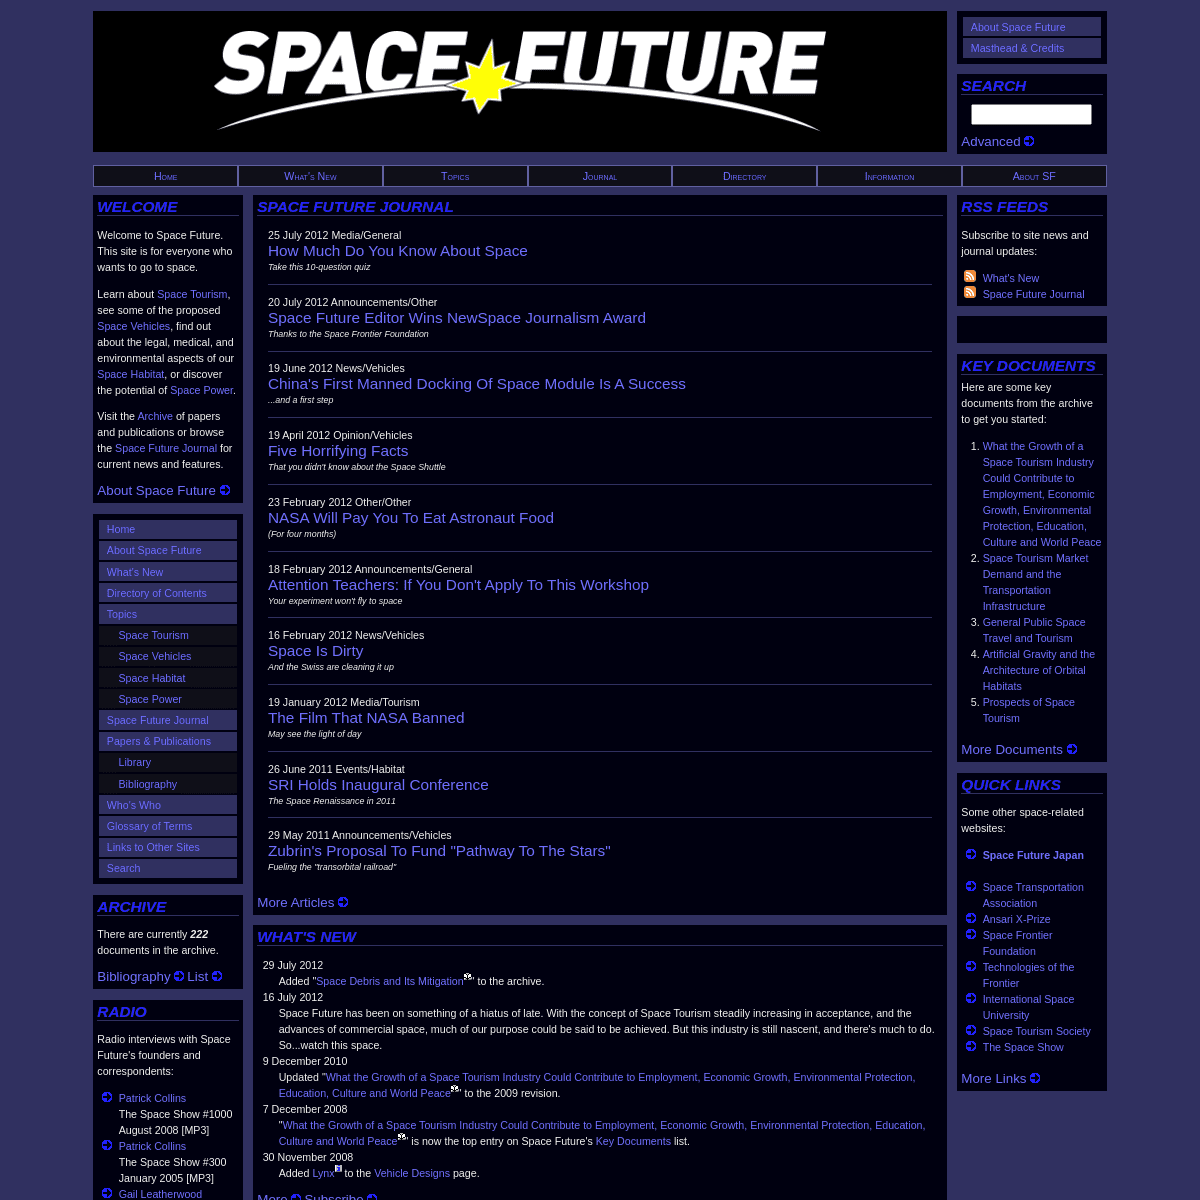 A complete backup of https://spacefuture.com